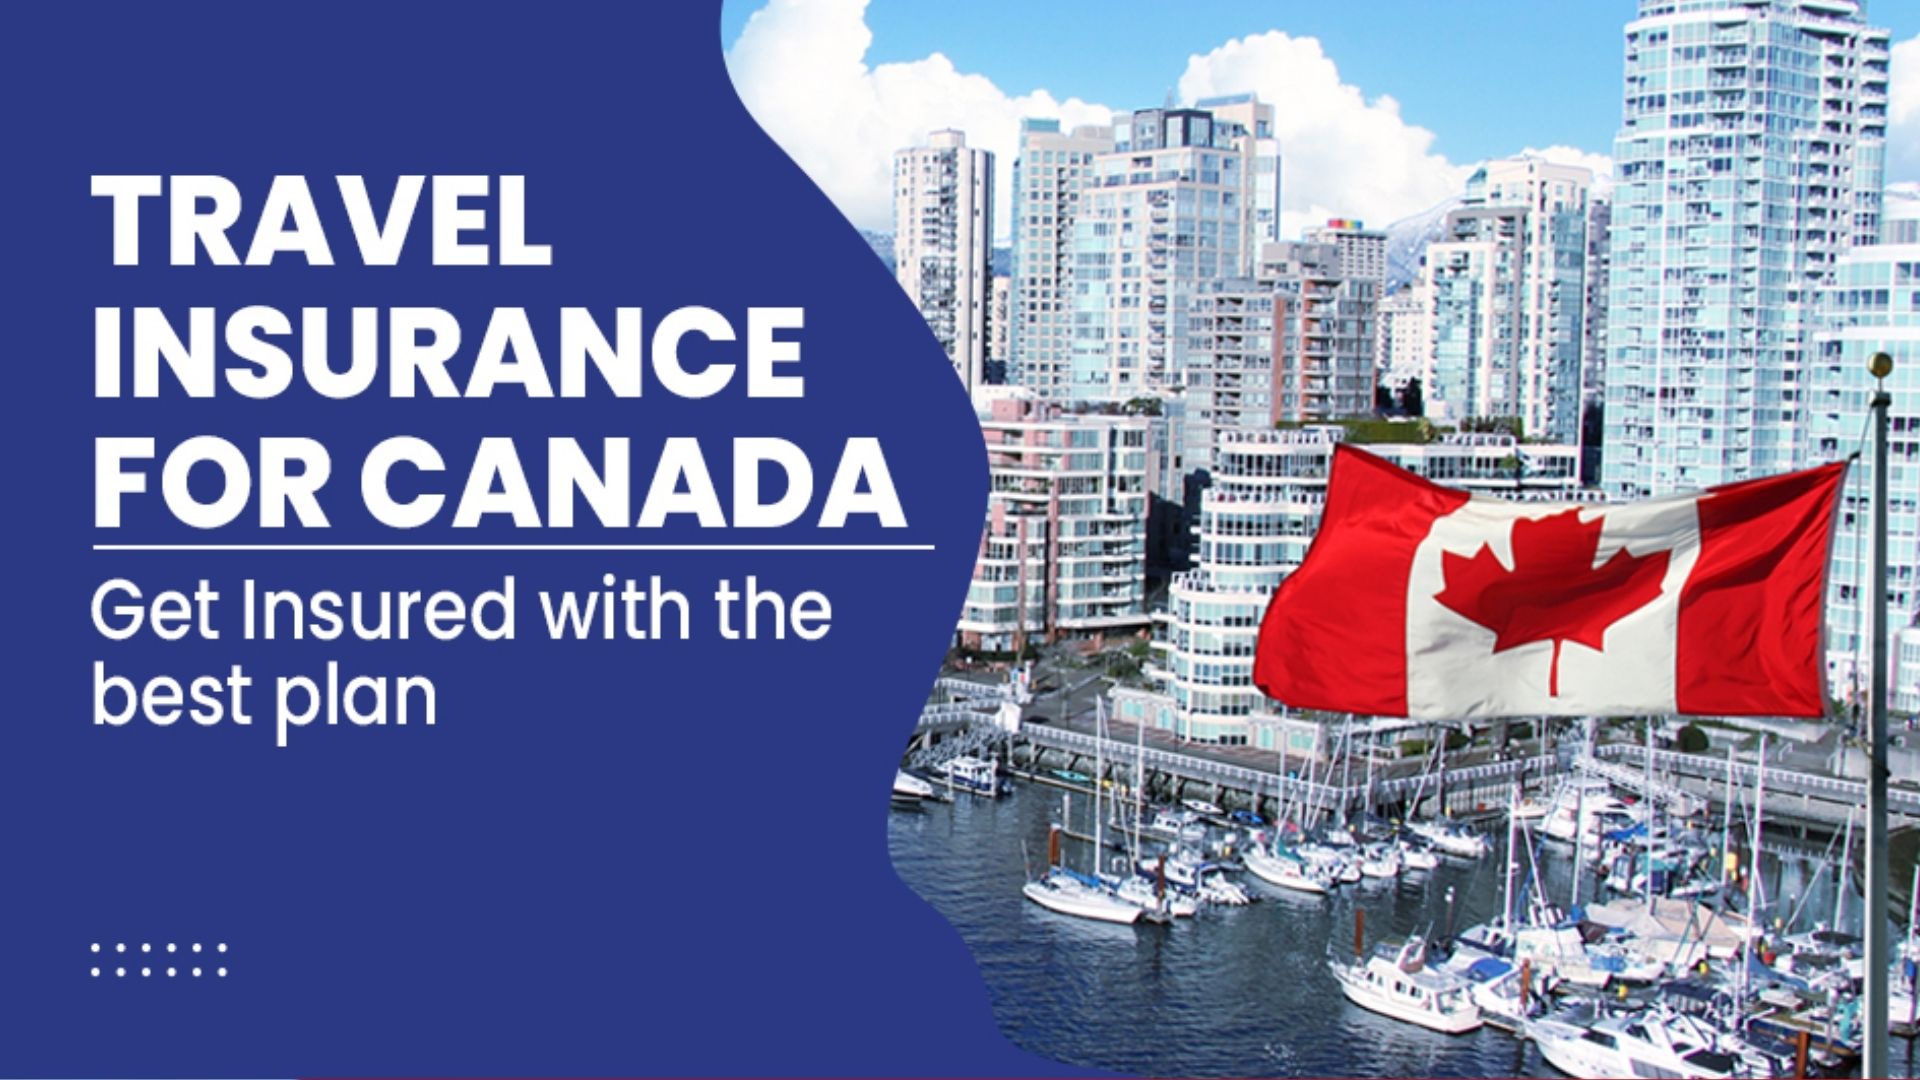 Travel Insurance for Canada